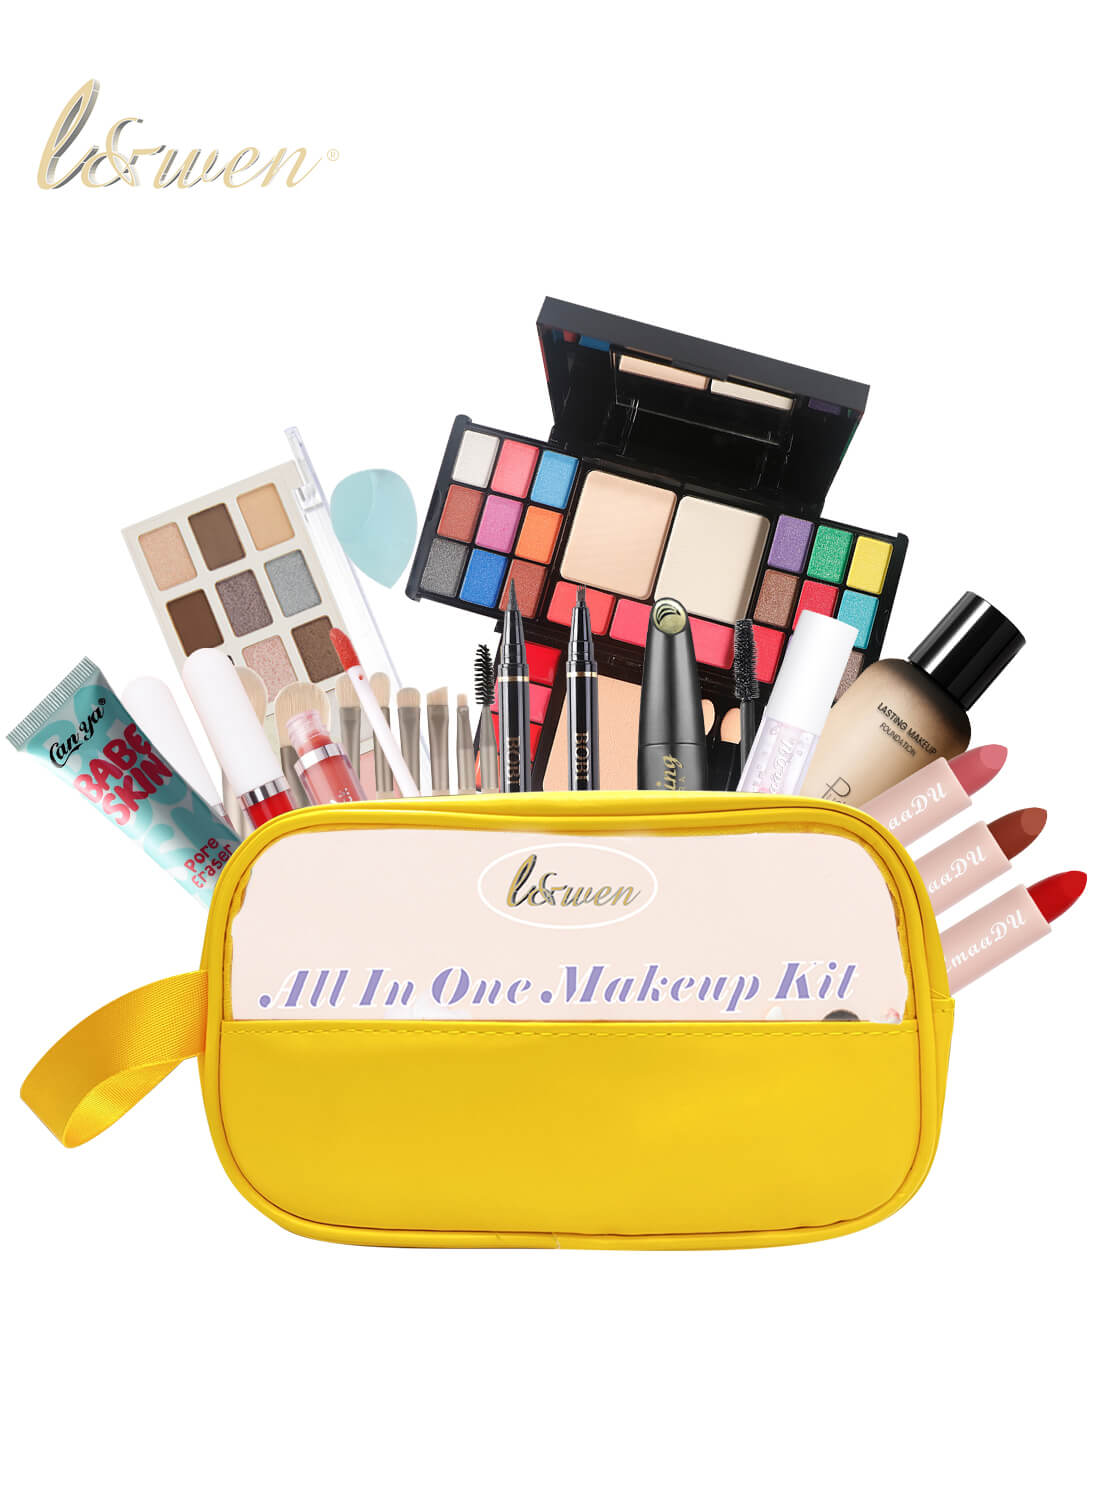 All in One Makeup Kit for Women